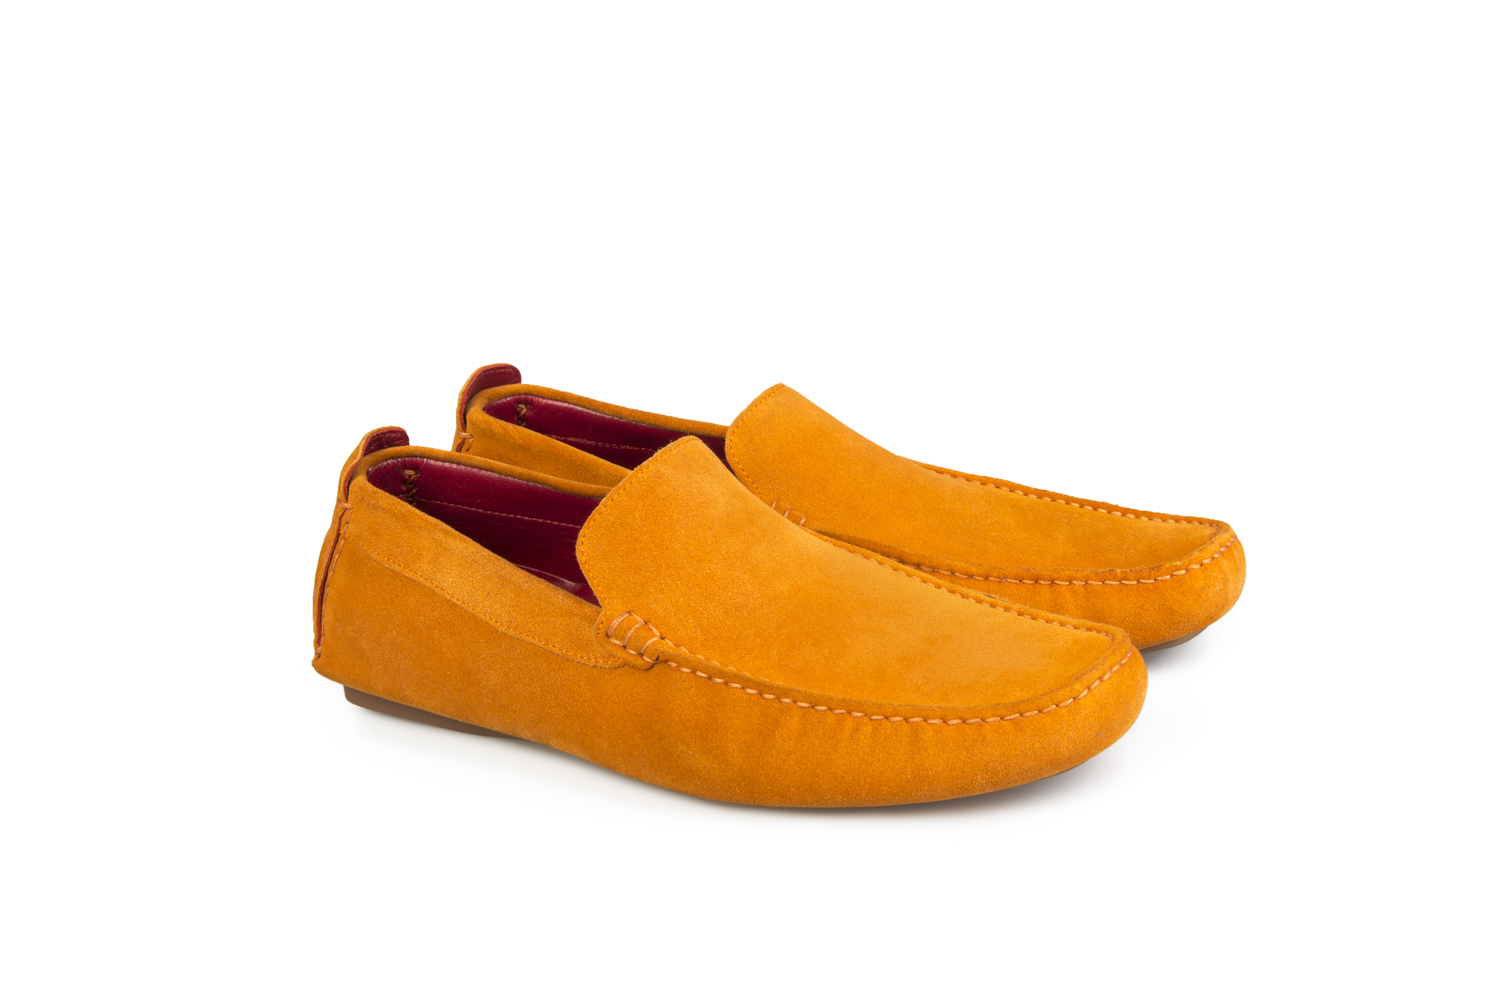 mens driving loafers uk